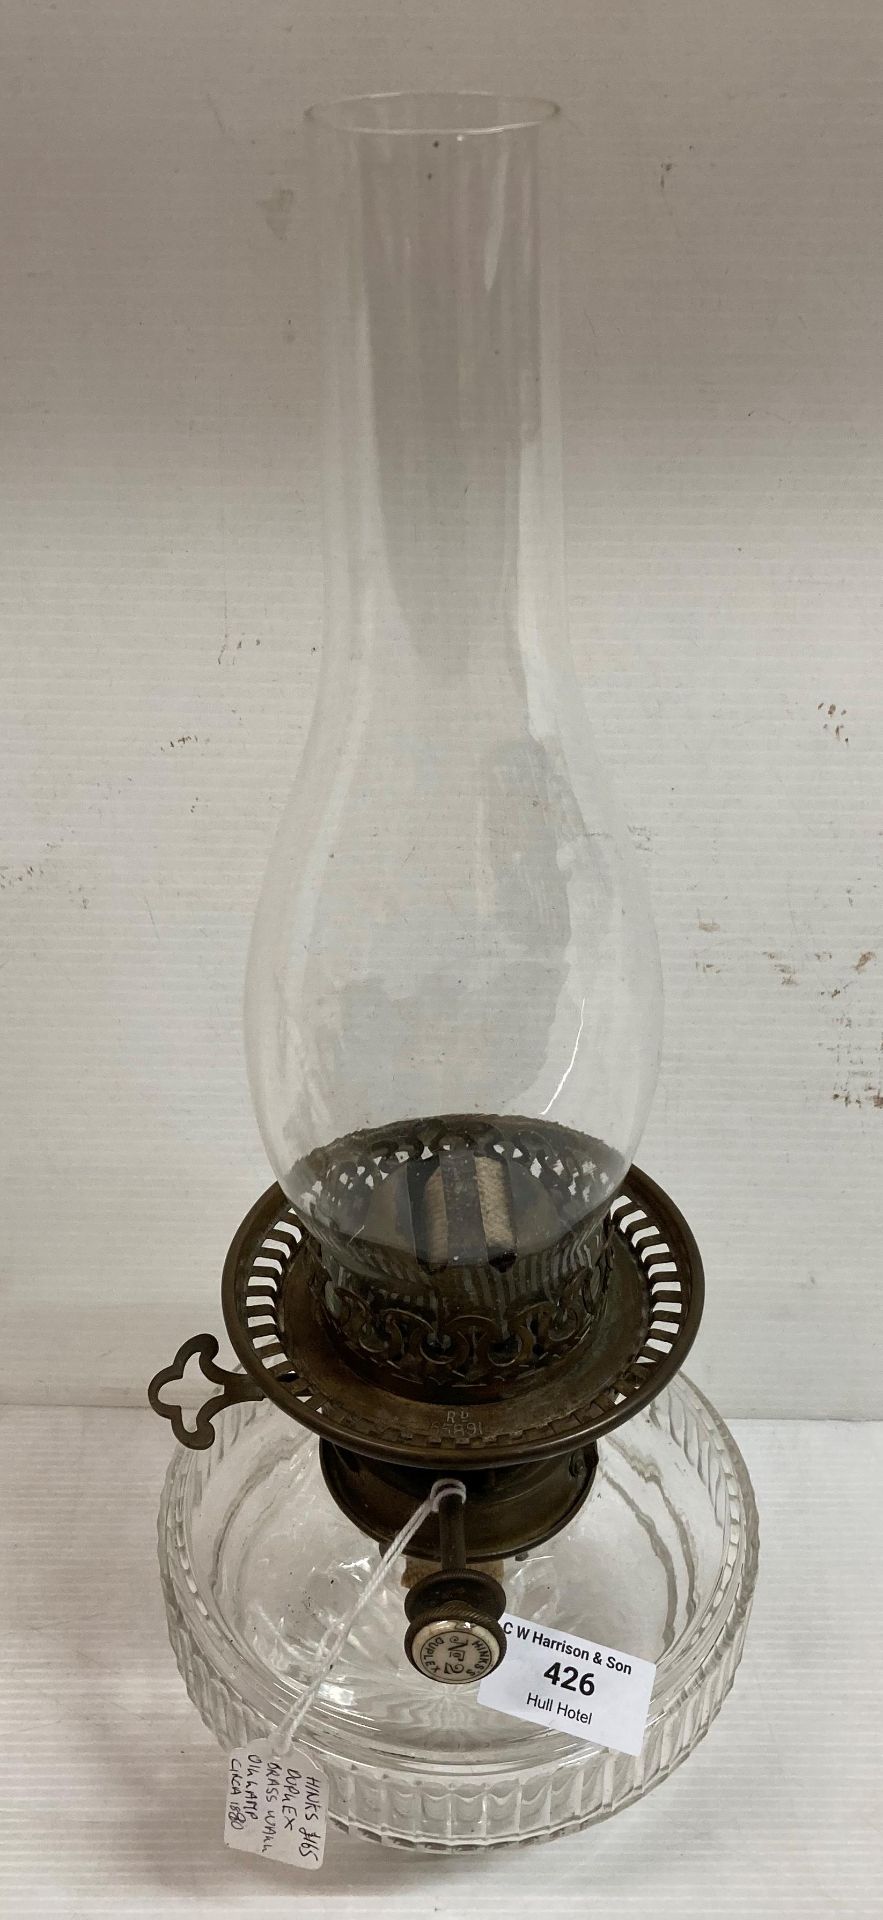 A Victorian Hinks Duplex No 2 oil lamp complete with brass wall holder (saleroom location: K10) - Image 2 of 2